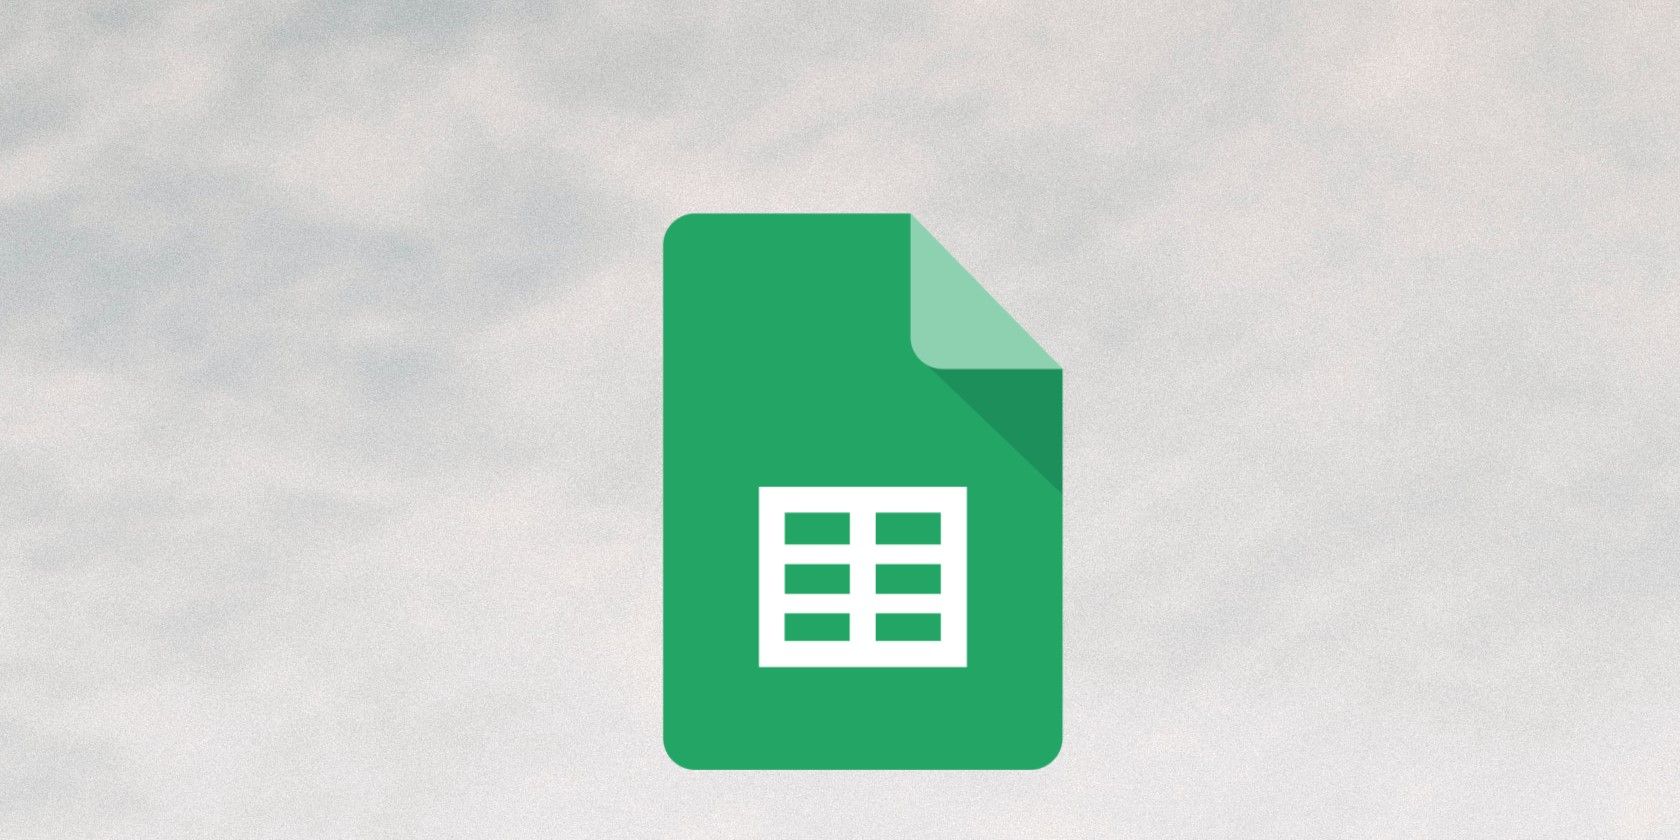 Google Sheets logo floating on a grey cloudy background